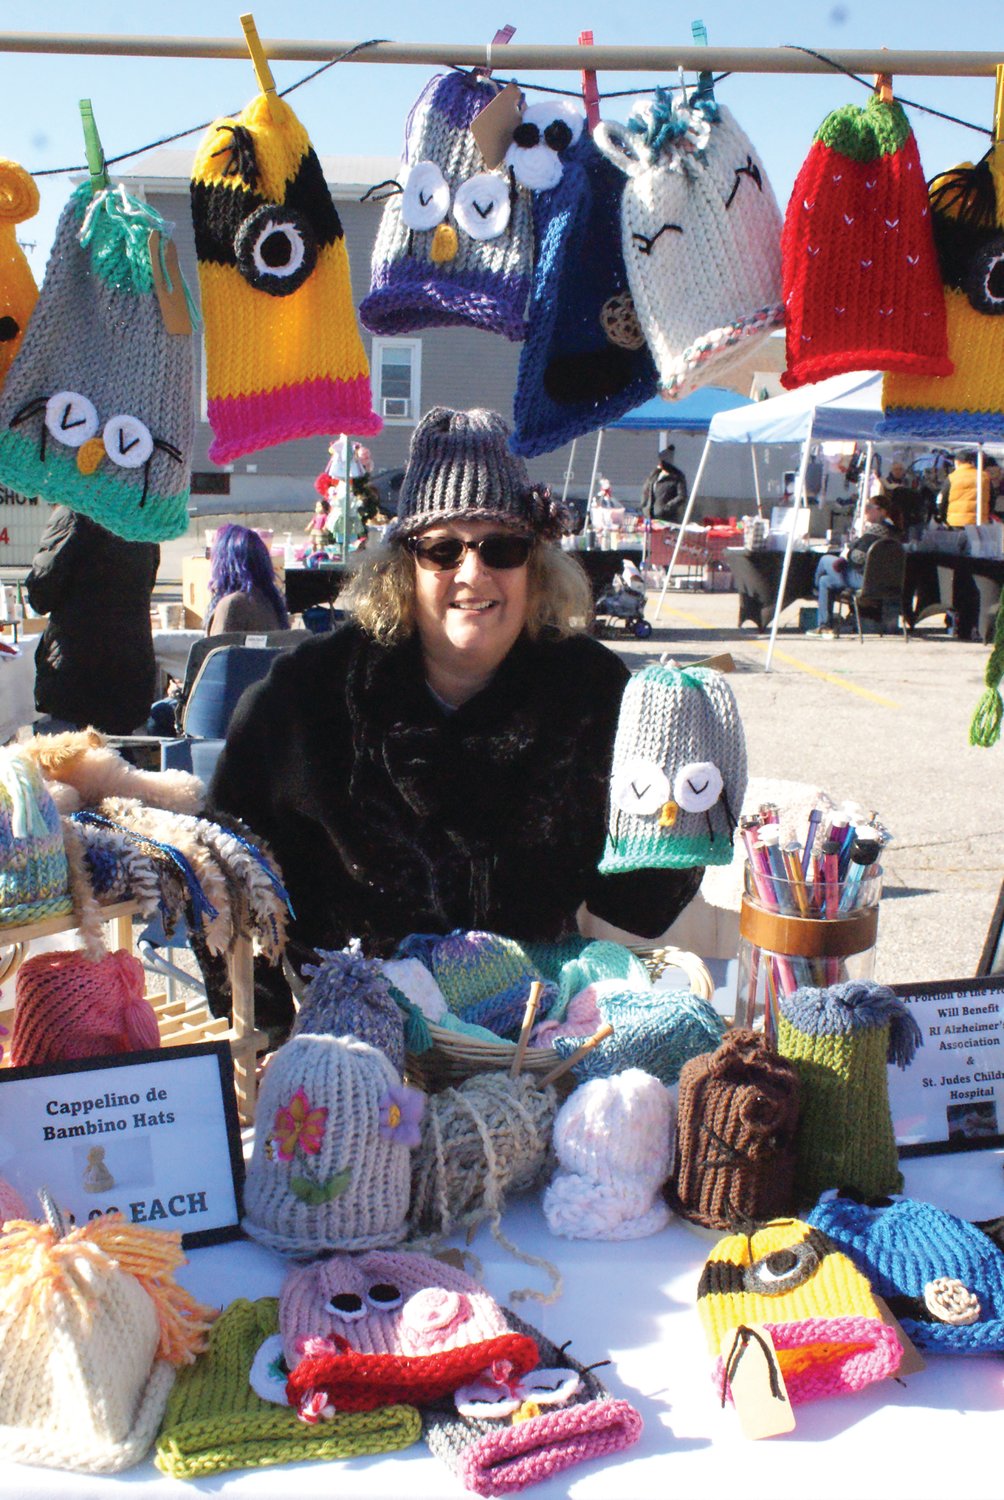 HAT’S OFF TO YOU: Showing off her original designs at the St. Mary’s Feast Society Ladies’ Auxiliary event was Jodi DiRaimo of Cappelino de Bambino Hats.